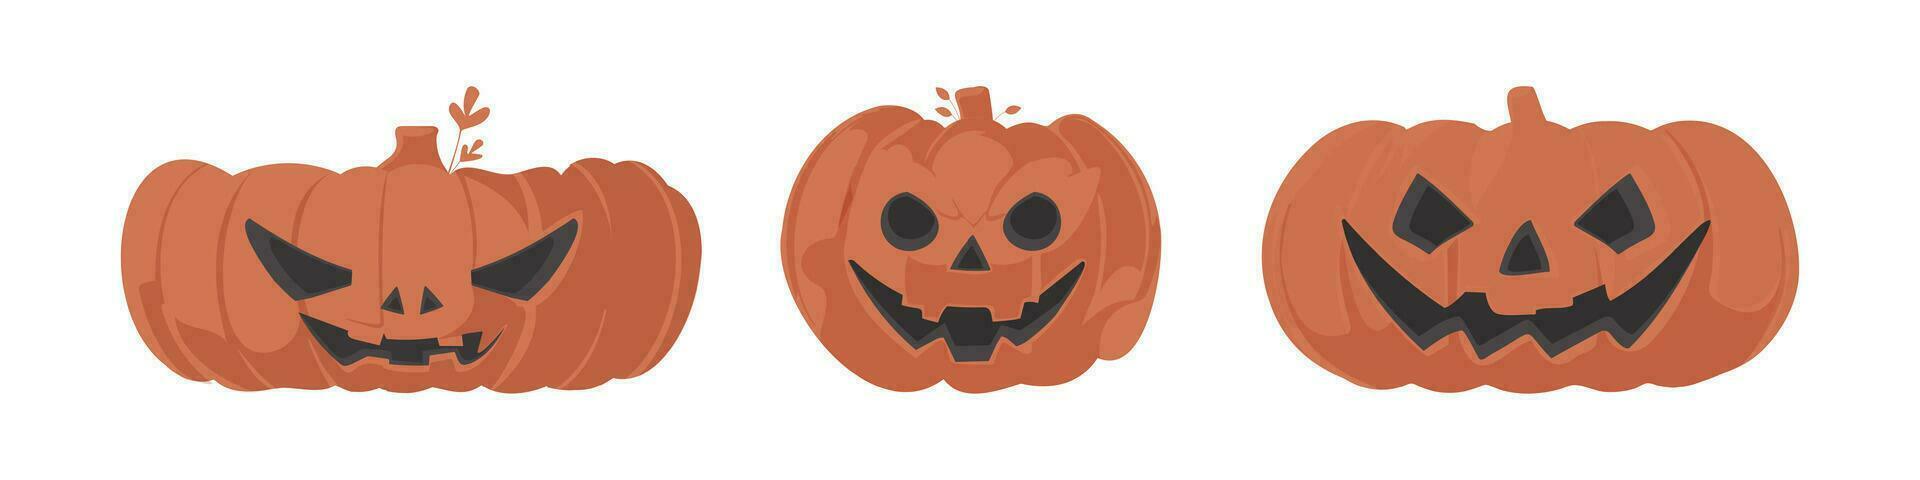 A bunch of pumpkins with spooky faces for Halloween. Cartoon style. vector